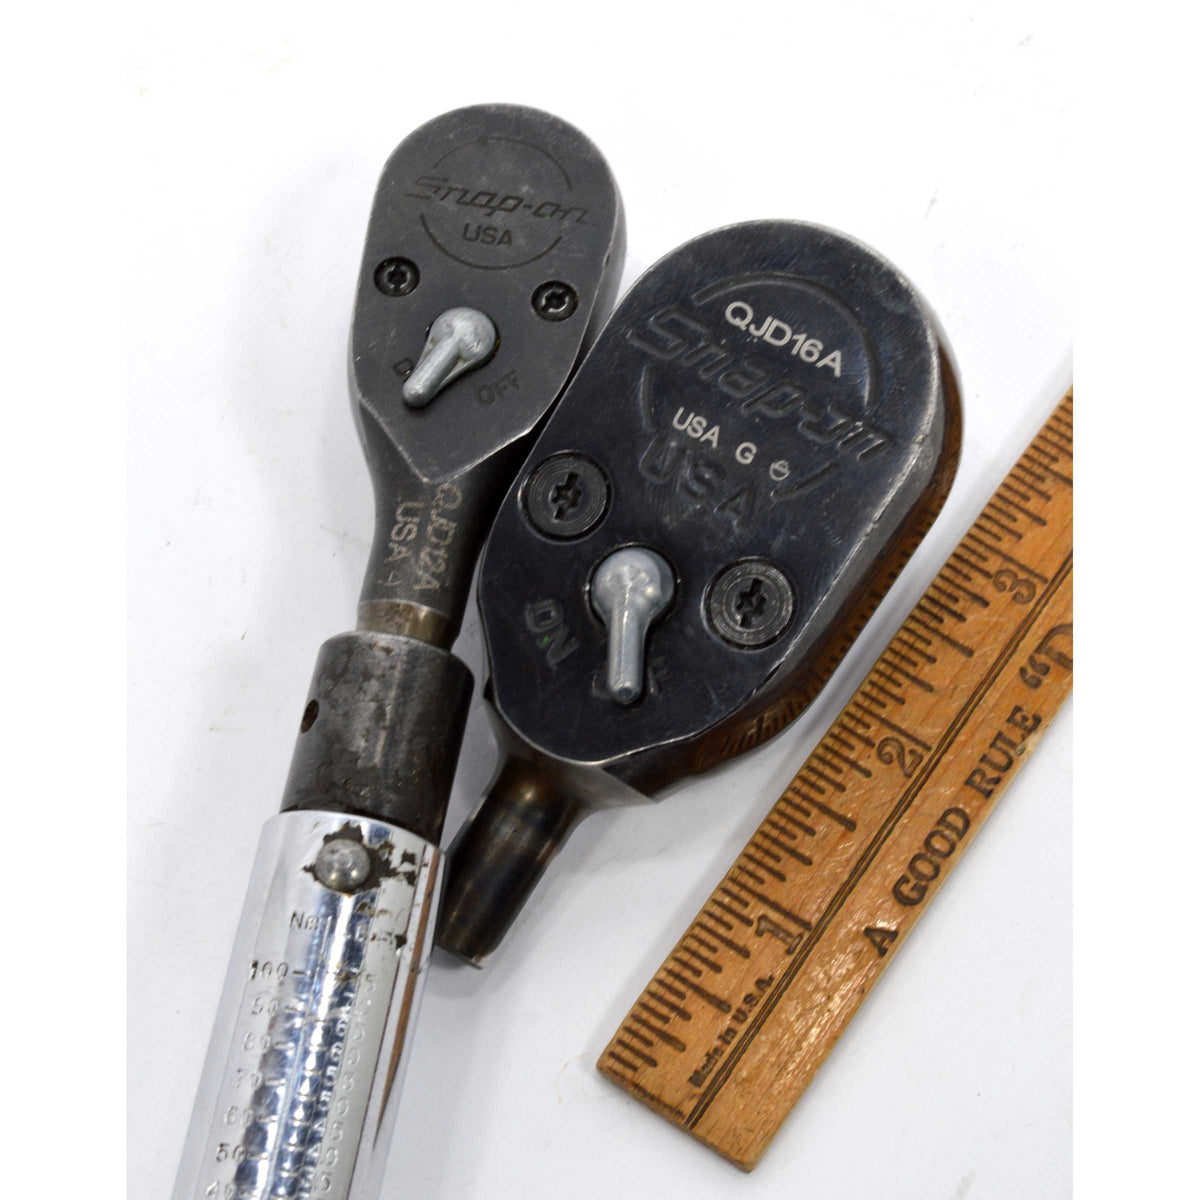 Interchangeable Head SNAP-ON RATCHET-TORQUE WRENCH #QJIJ275 with